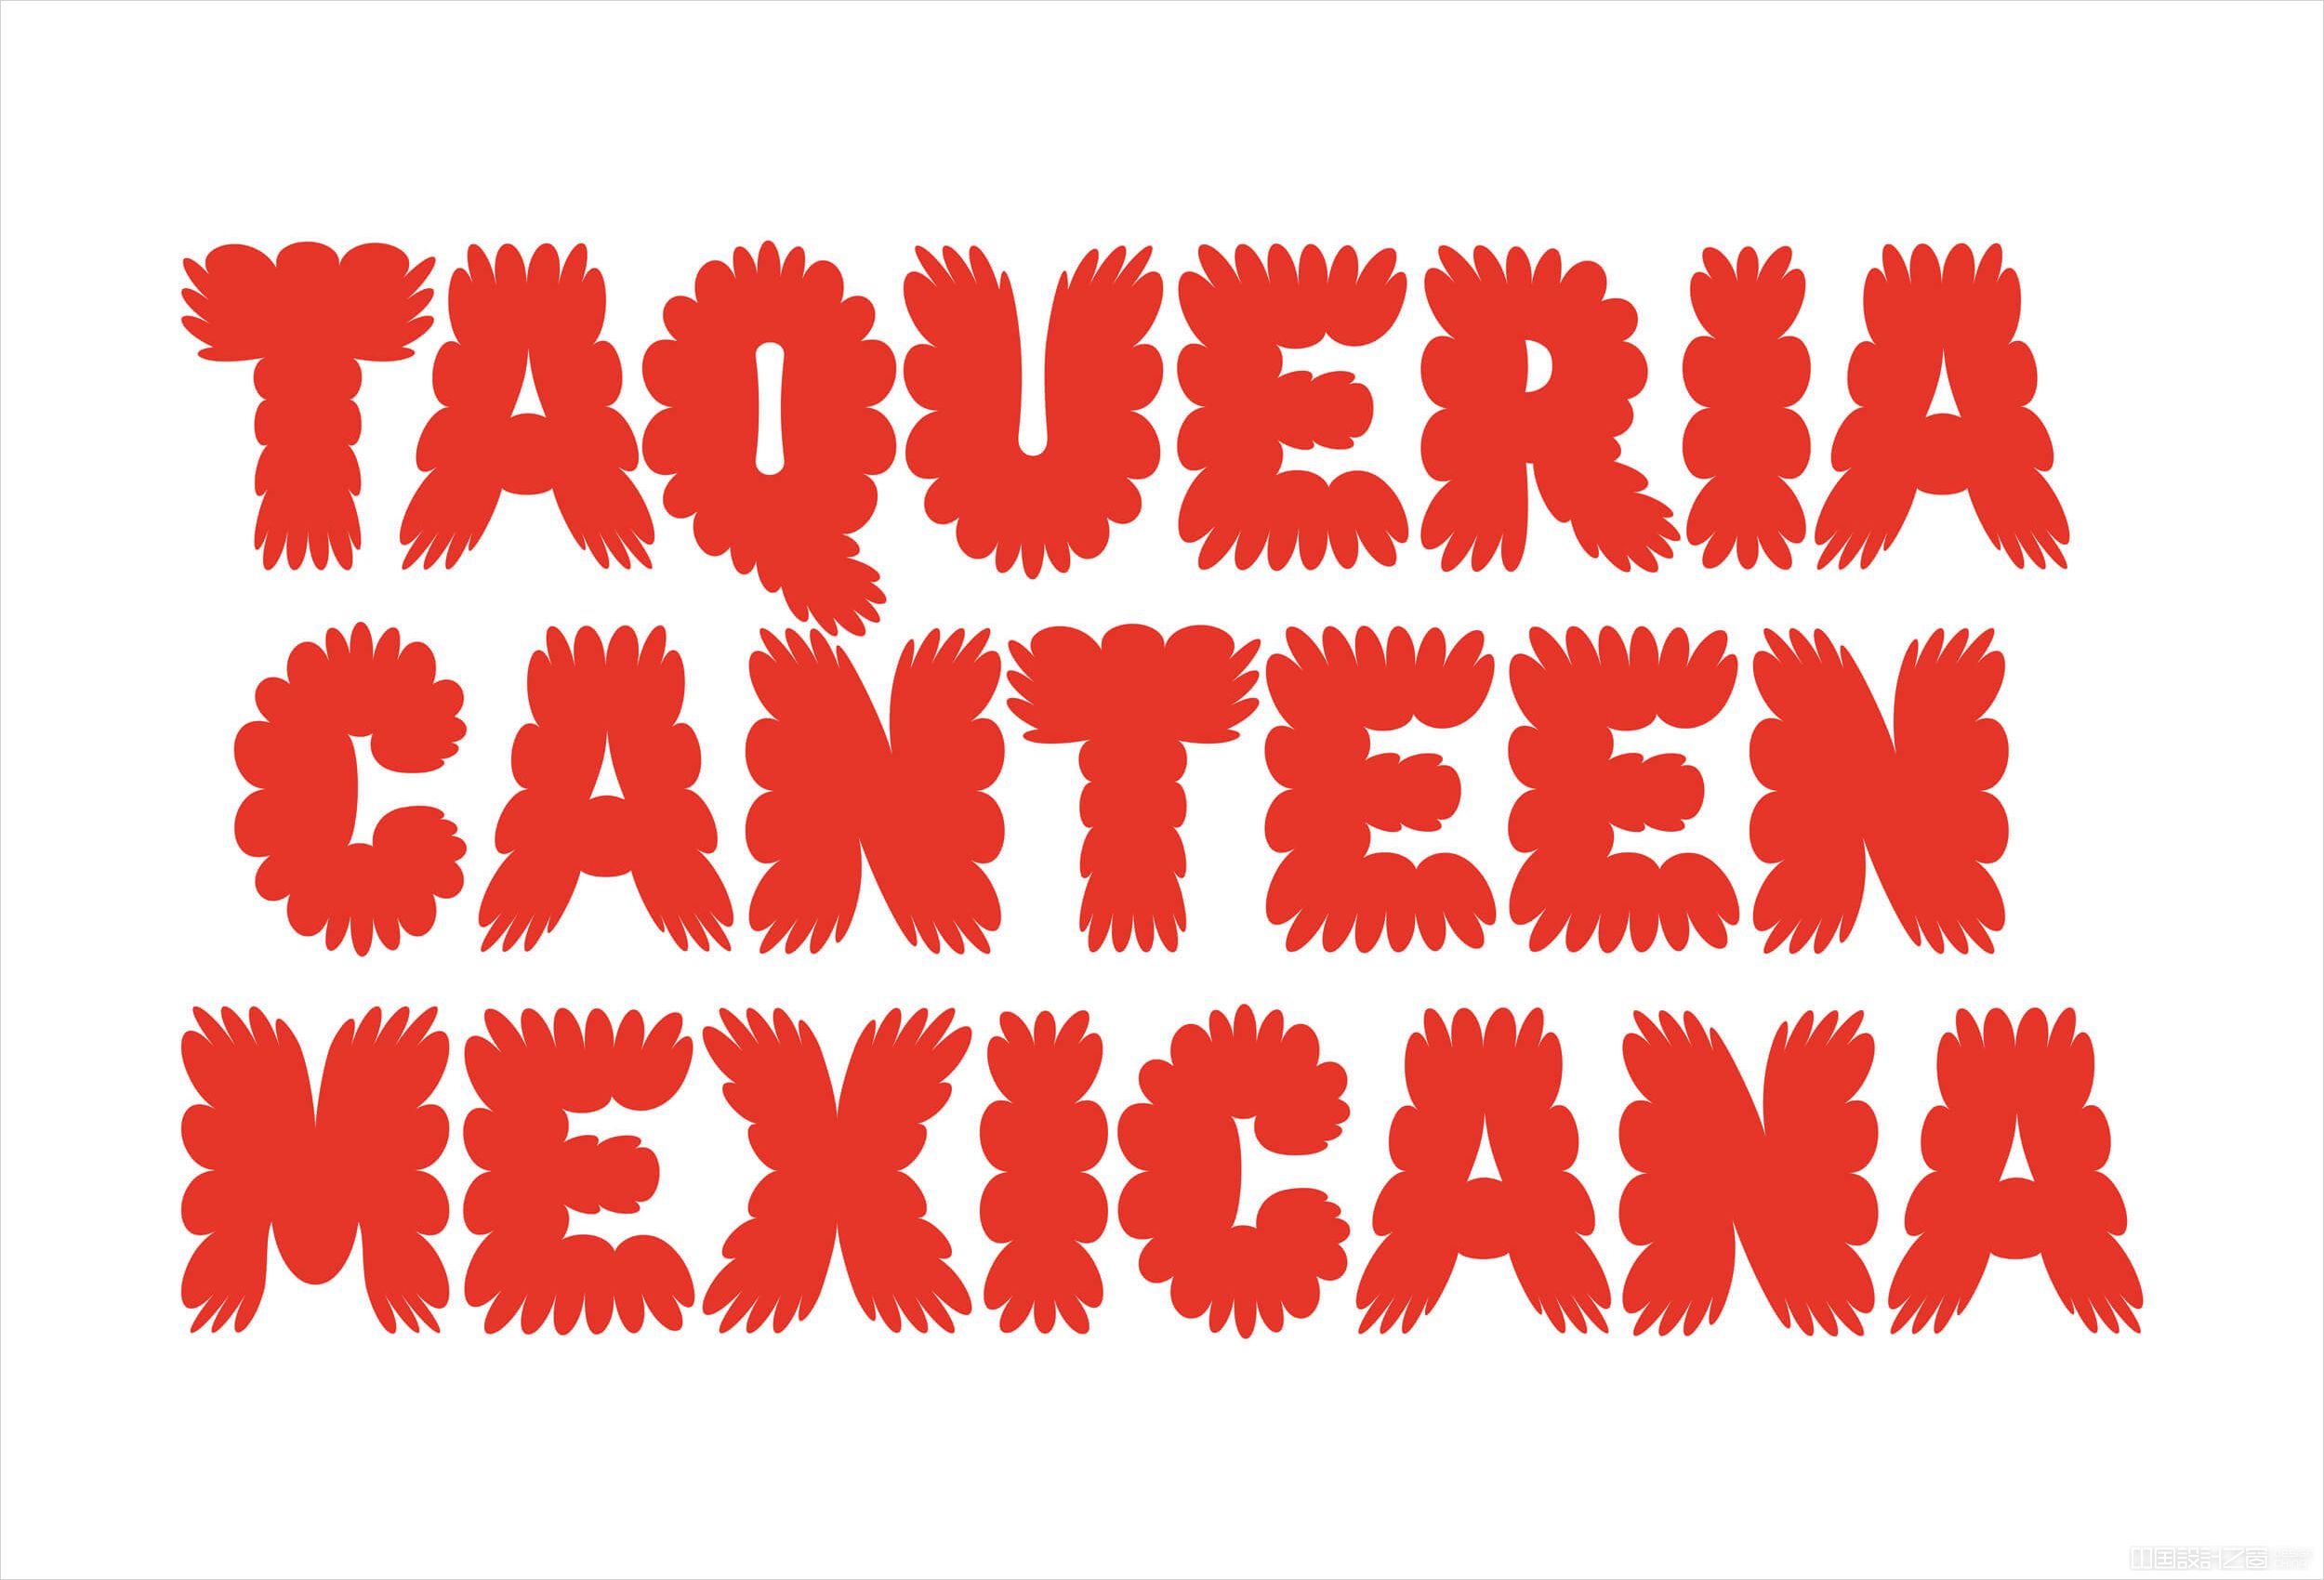 A flora-inspired custom typeface and logotype designed by Seachange for Mama Mexa, an Auckland-ba<em></em>sed taco pop-up